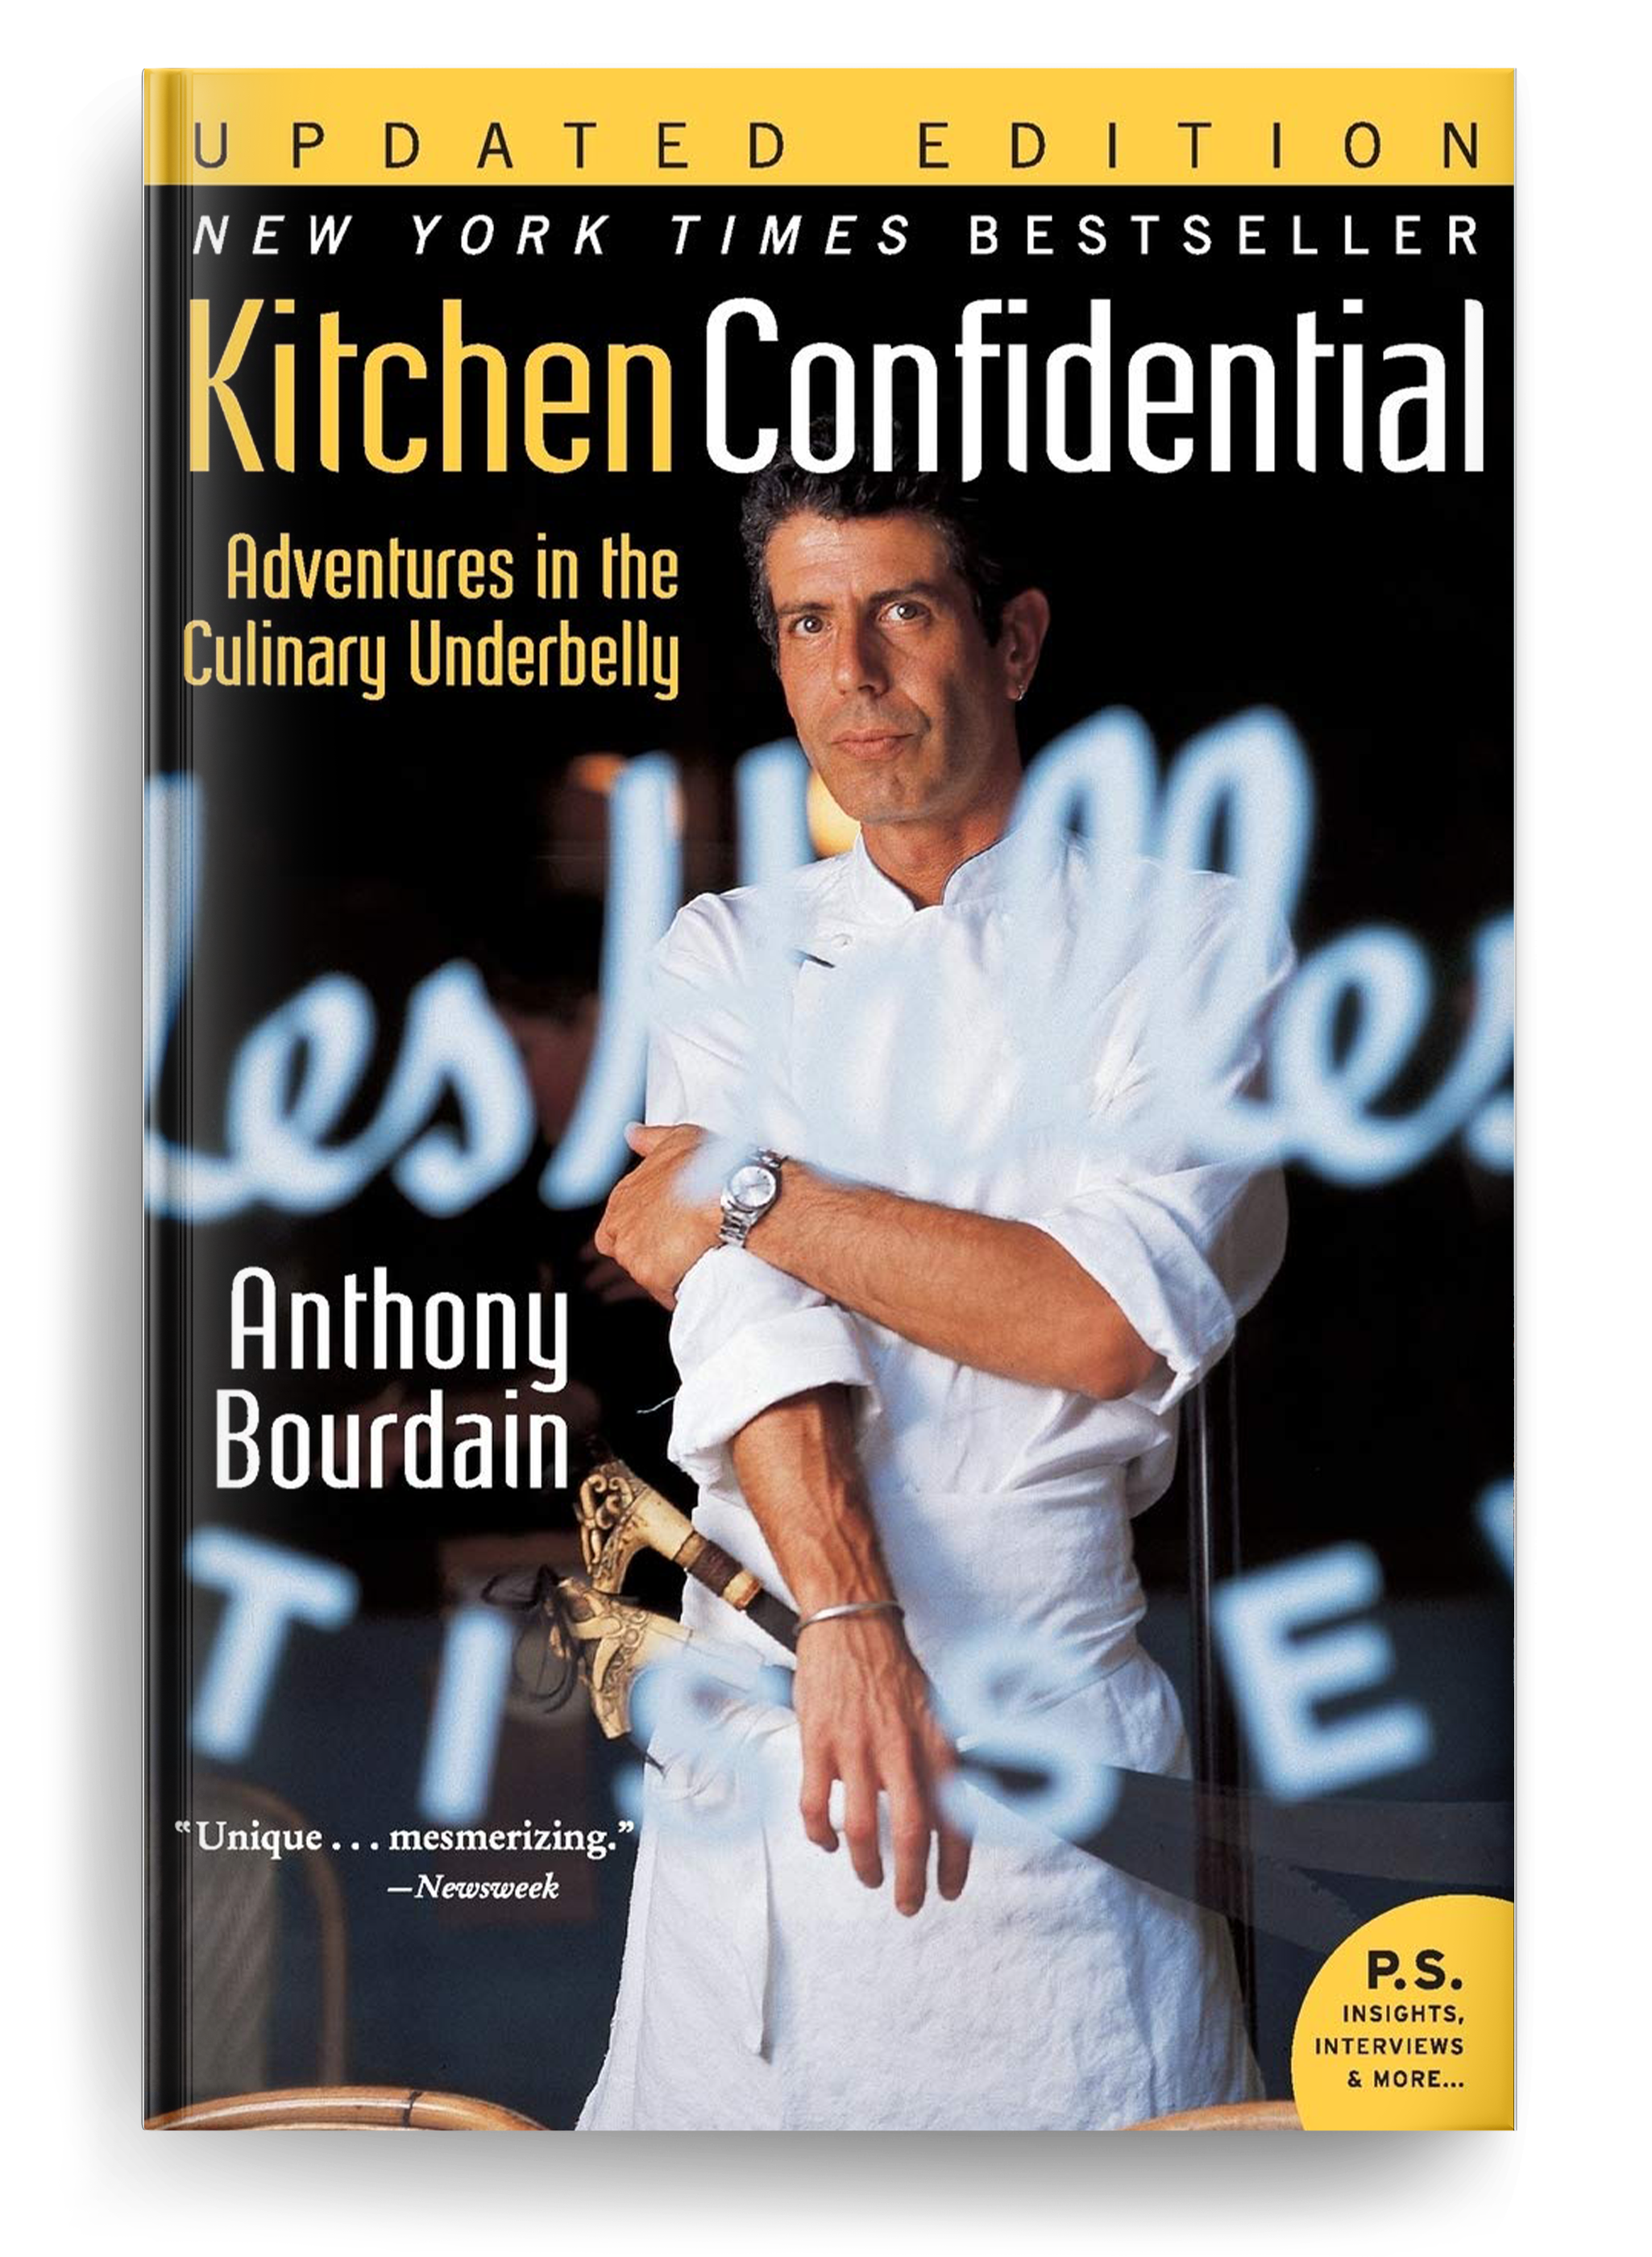 Kitchen Confidential Book Club.png